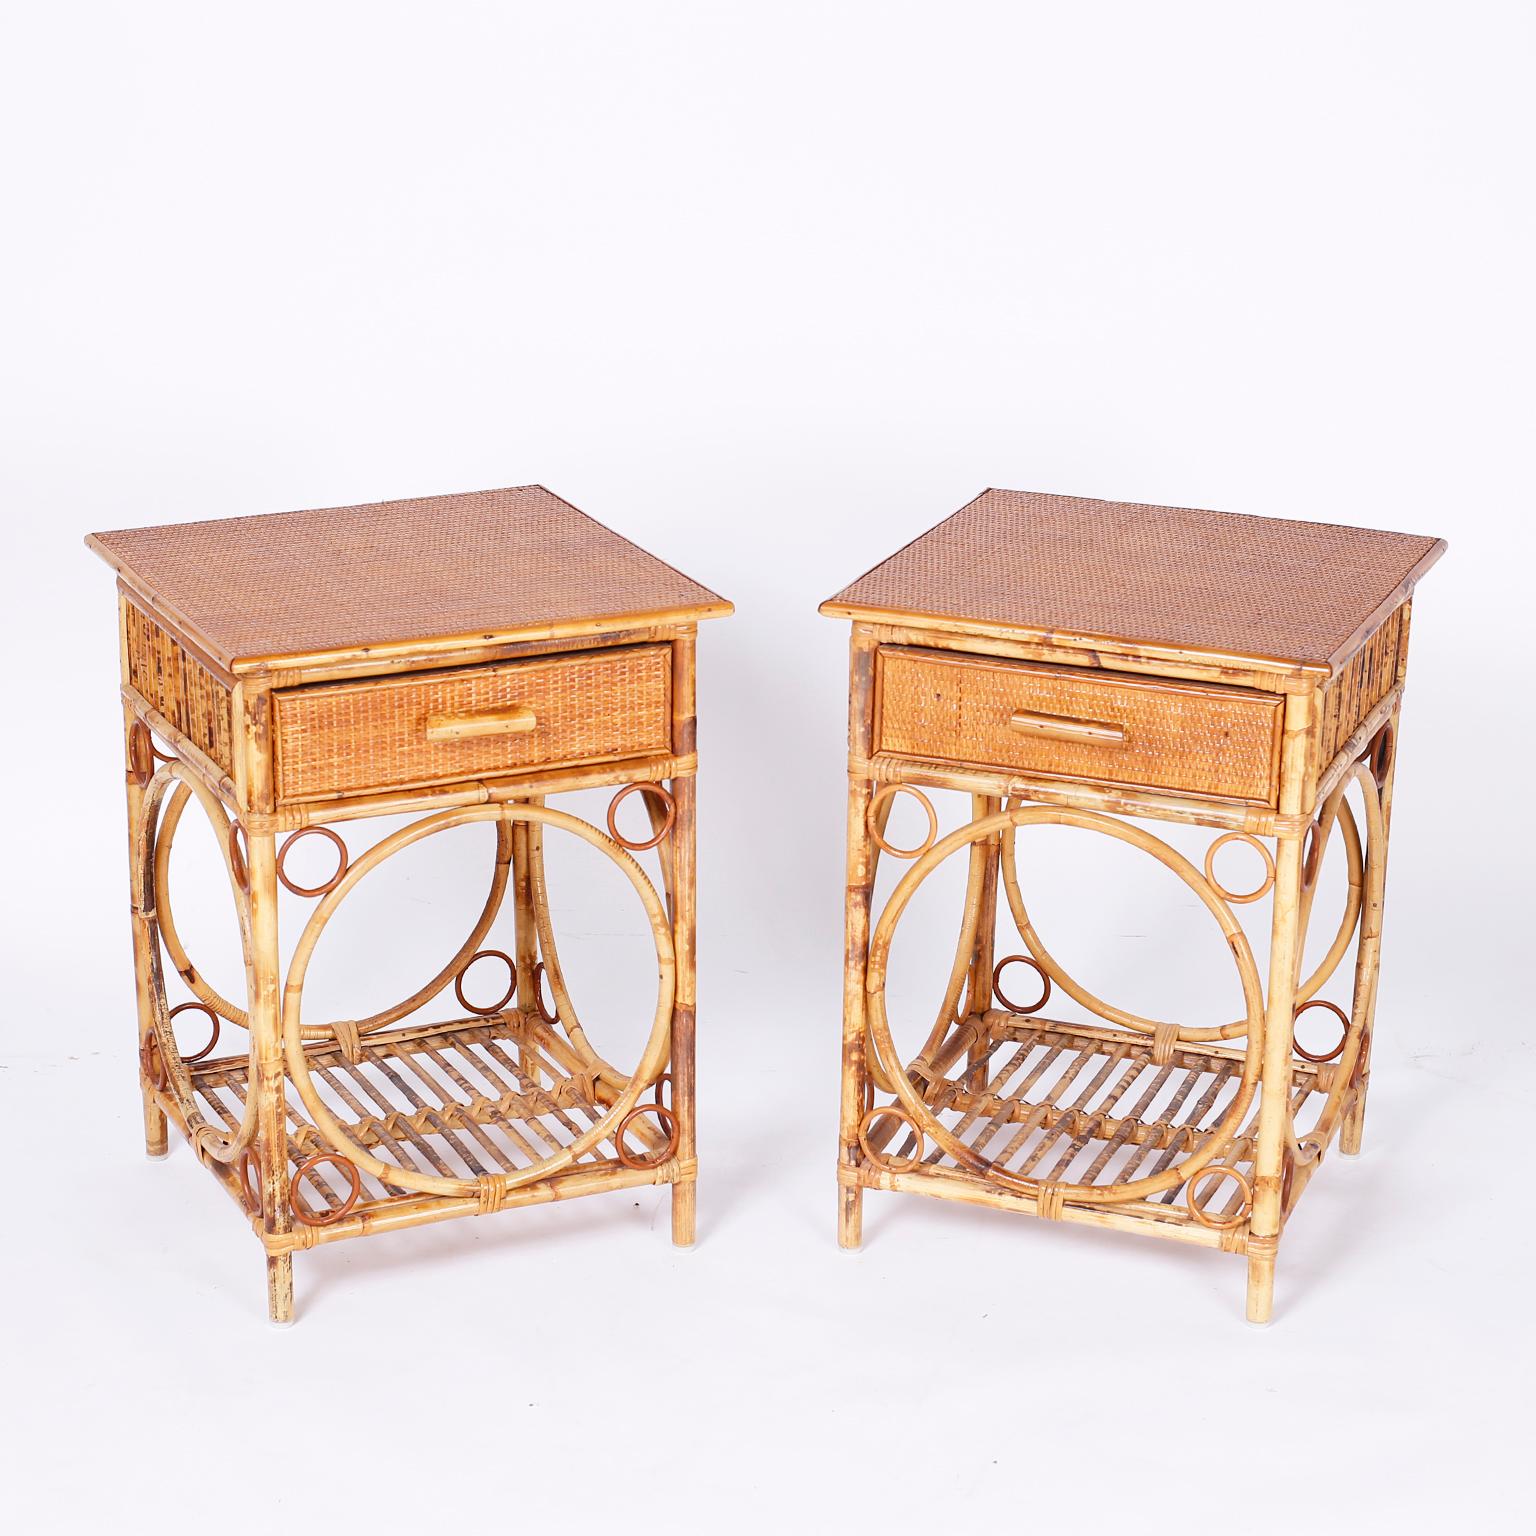 British Colonial Pair of Bamboo and Grasscloth Tables or Stands